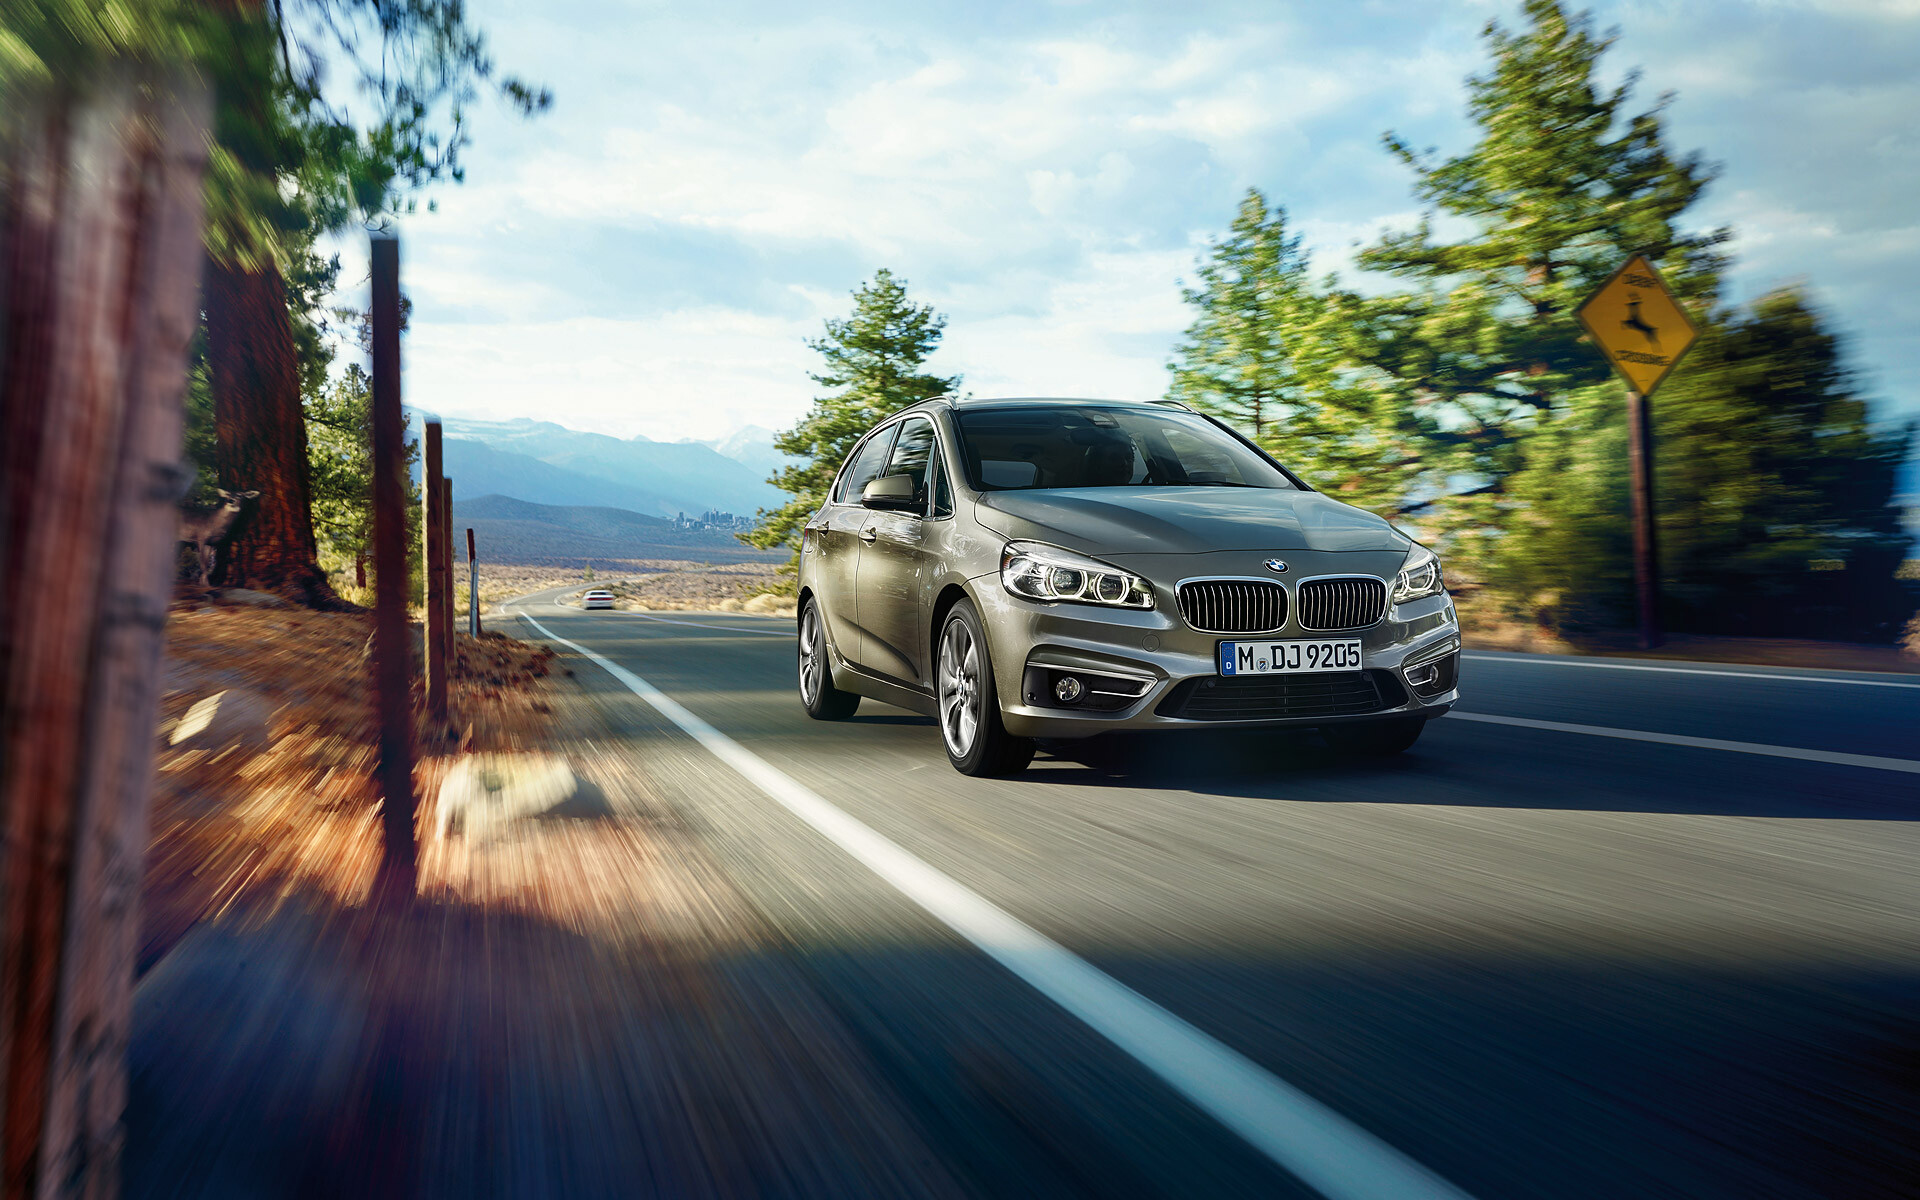 BMW 2 Series: Active Tourer, A five-door, two-row compact MPV produced since 2014. 1920x1200 HD Wallpaper.